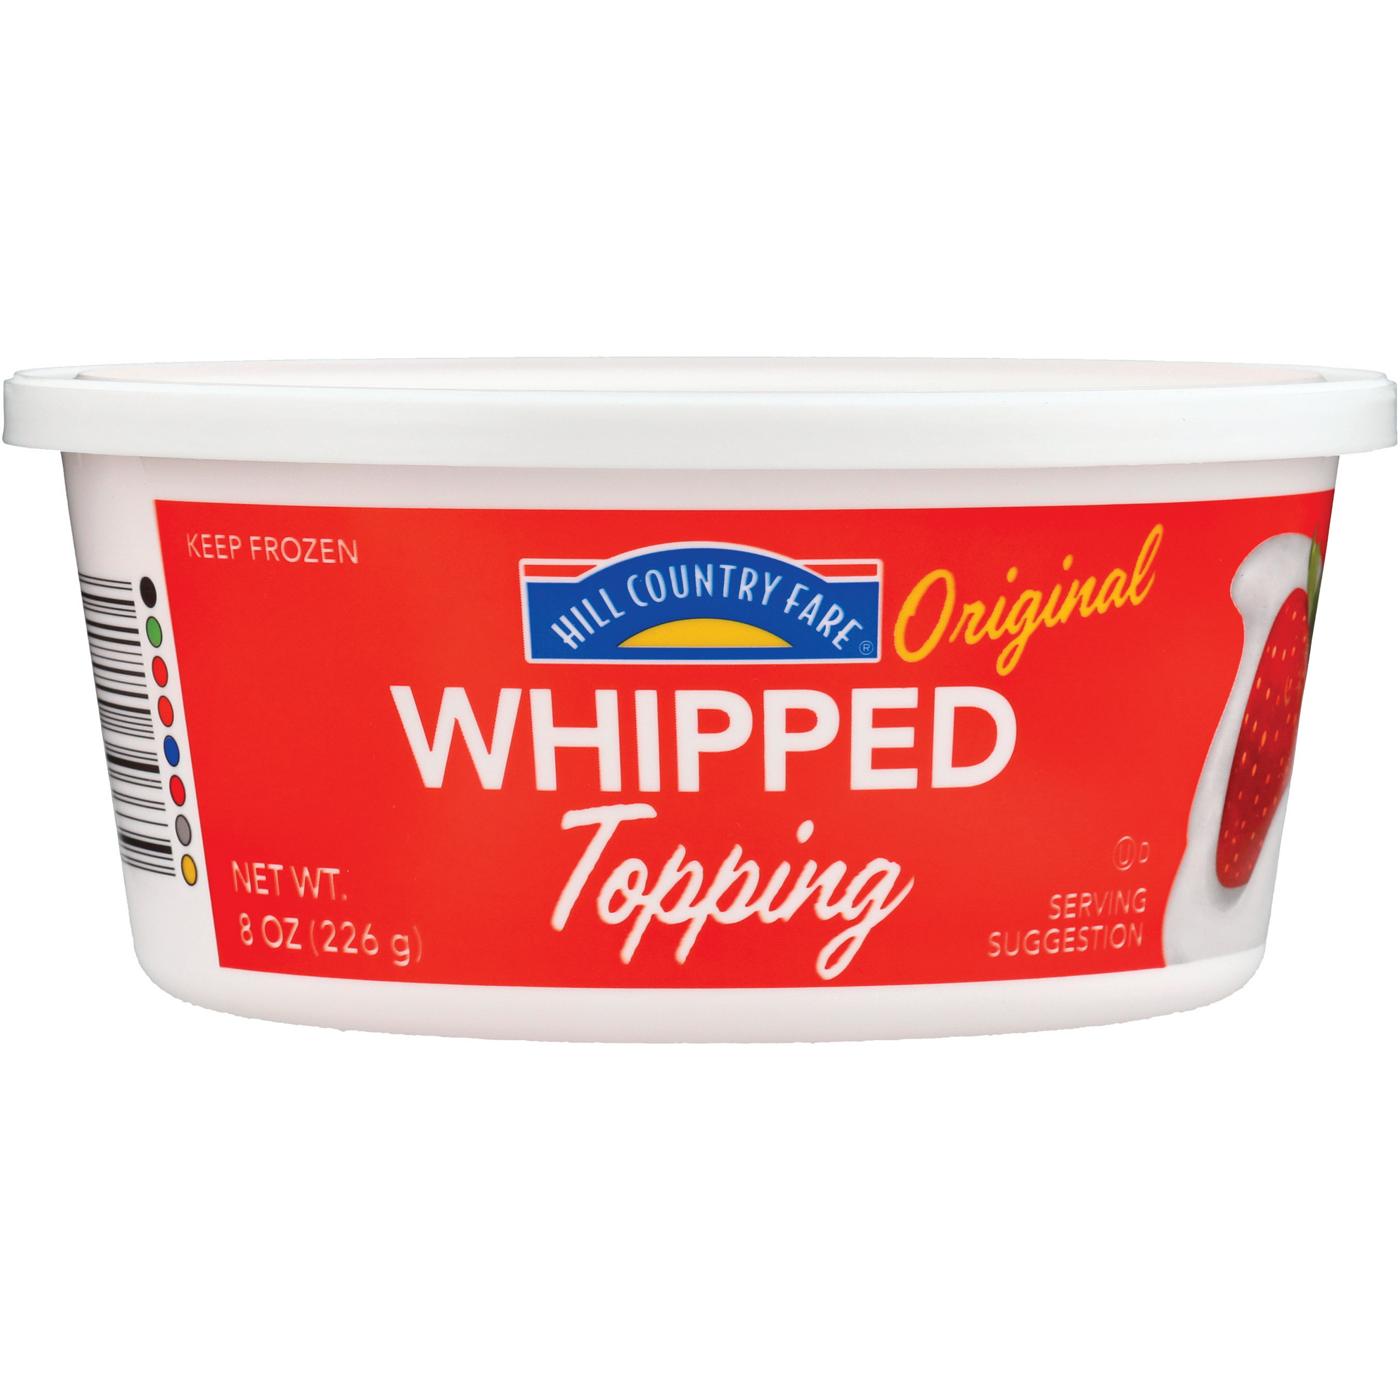 Hill Country Fare Original Whipped Topping; image 2 of 2